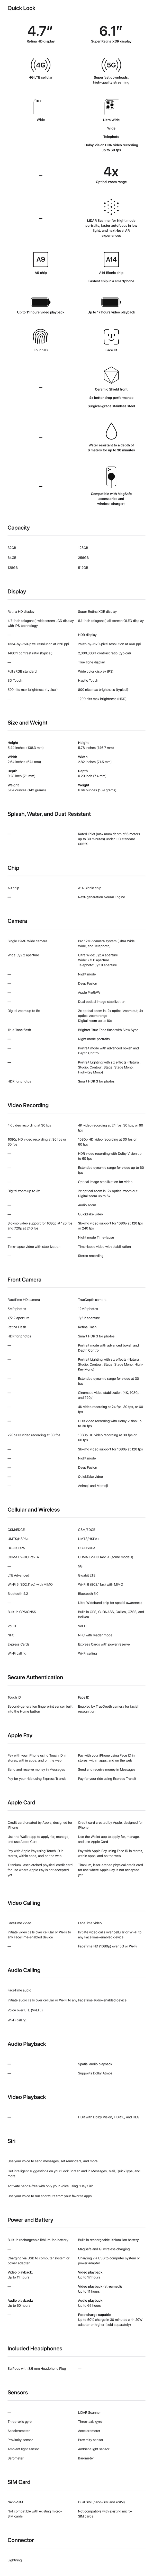 Features comparison between iPhone 6S and 12 Pro, as listed on Apple’s website